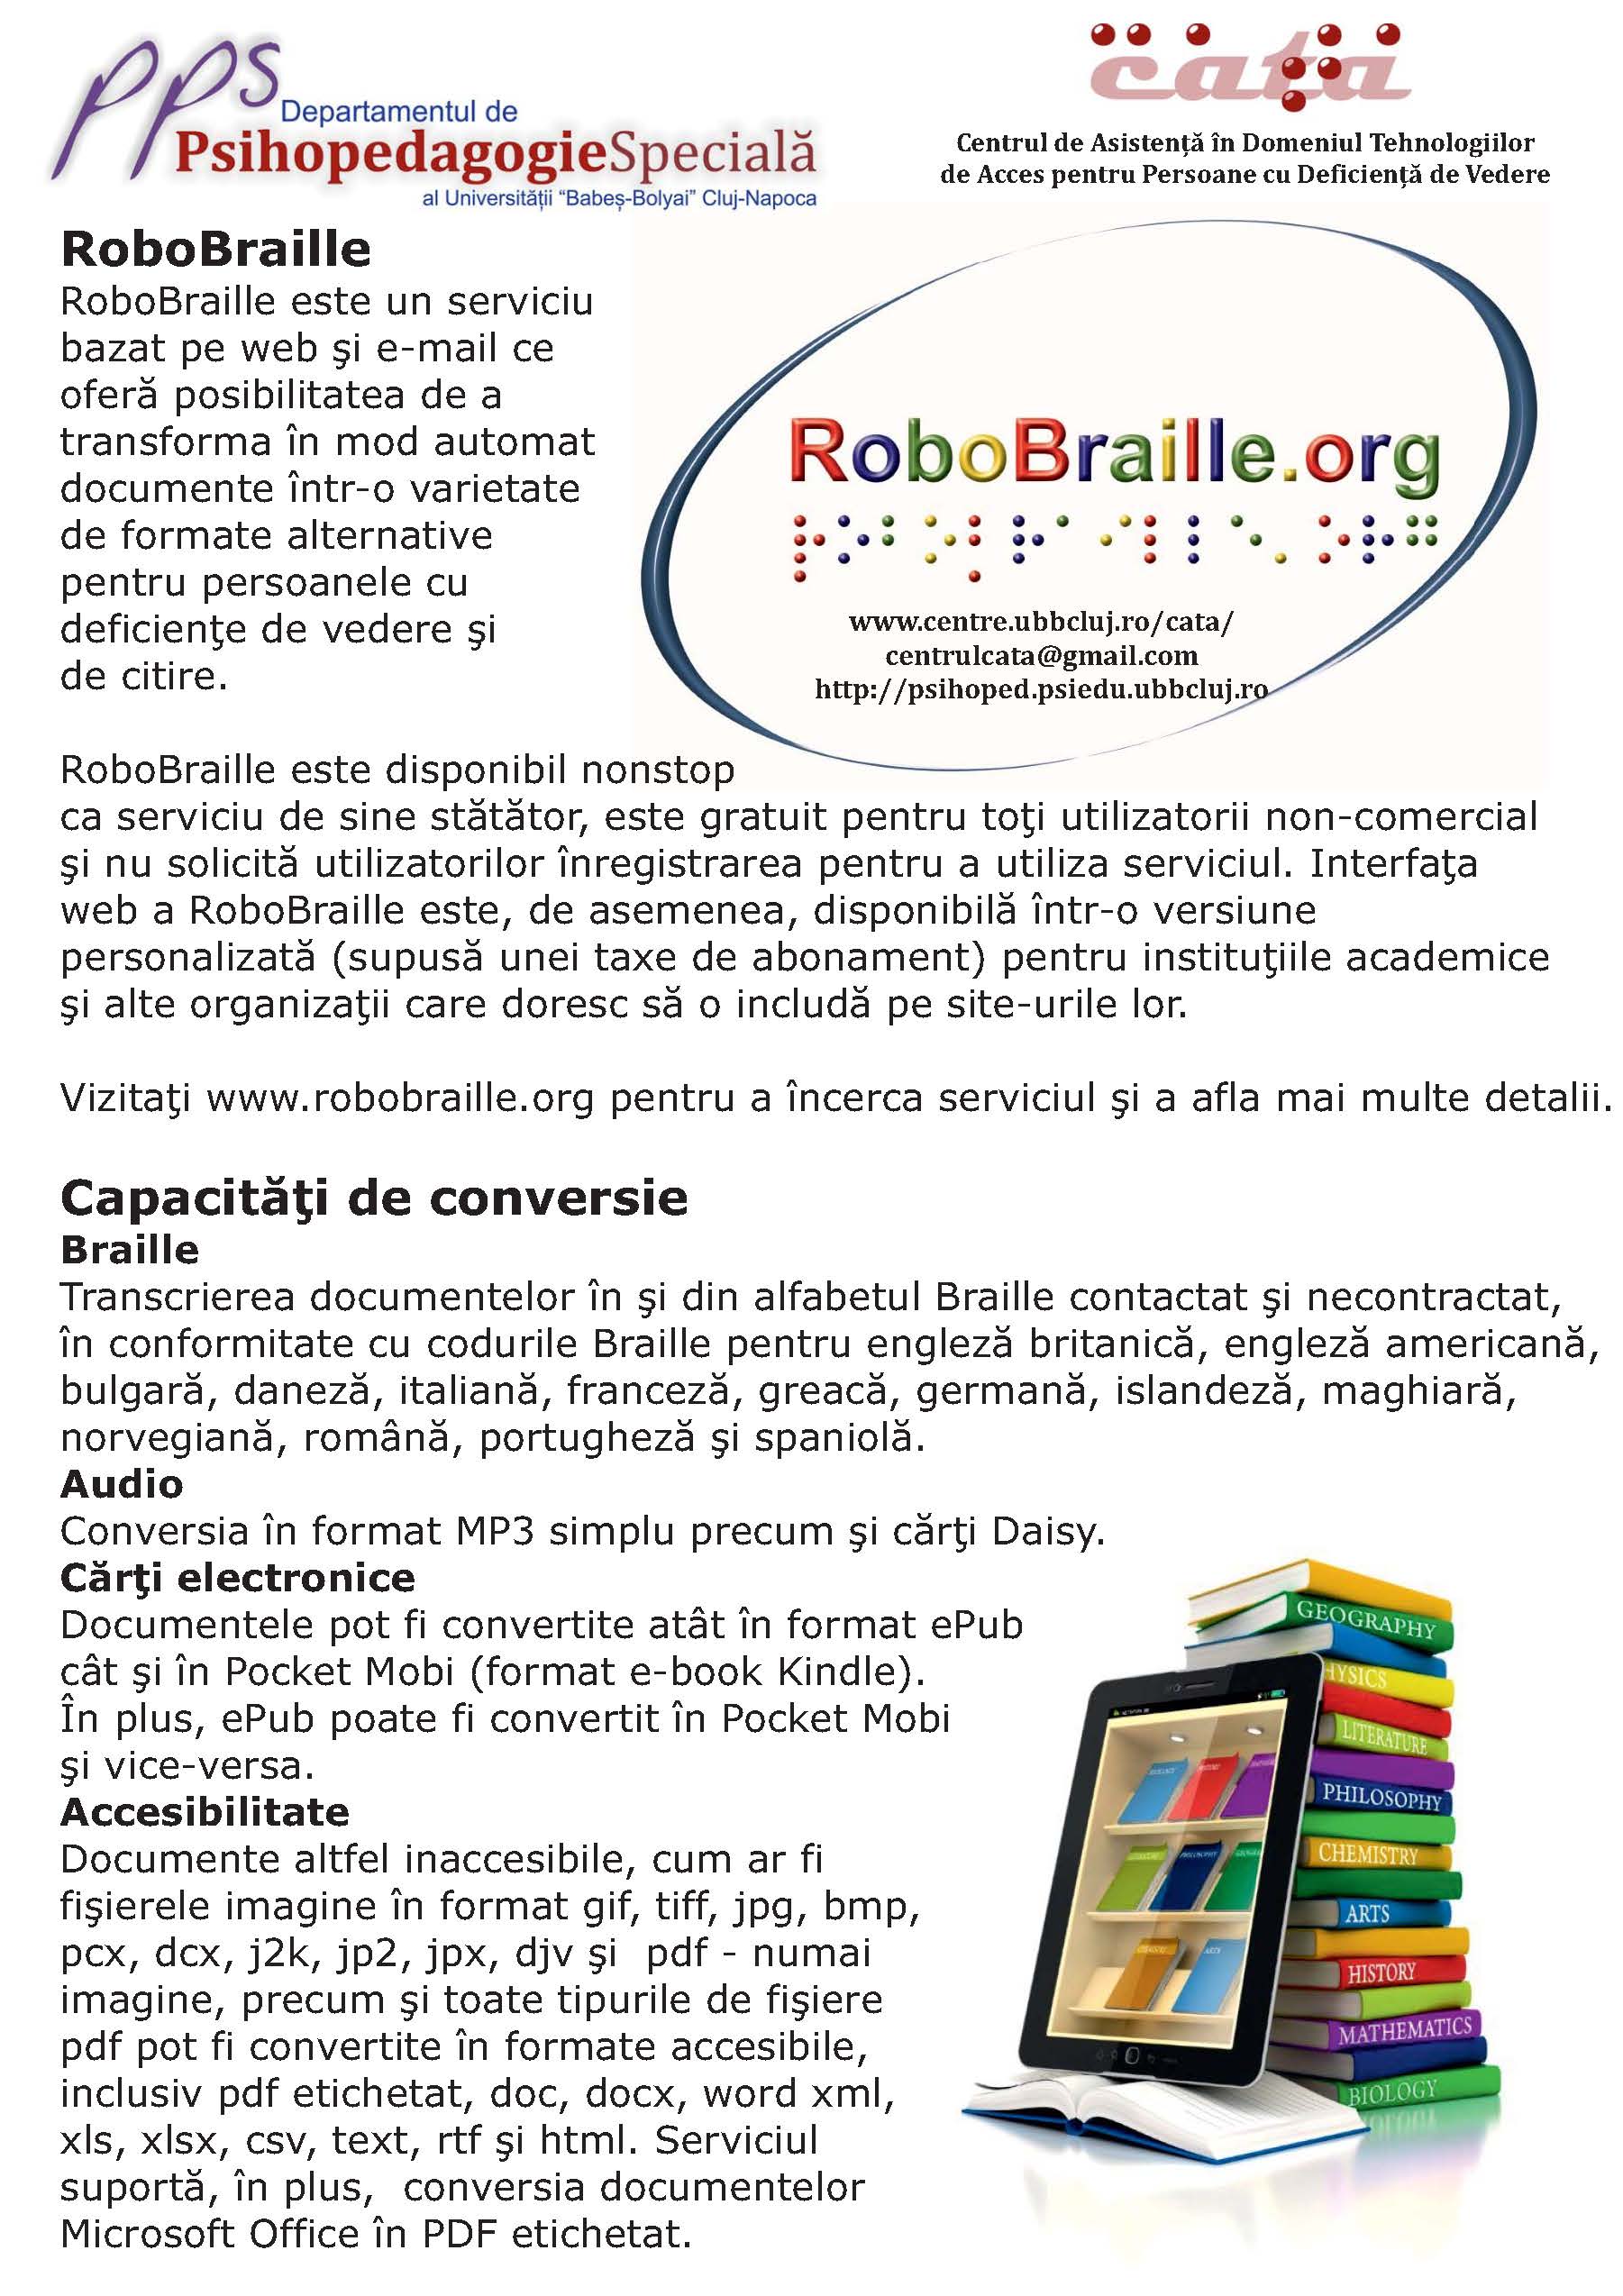 afis RoboBraille